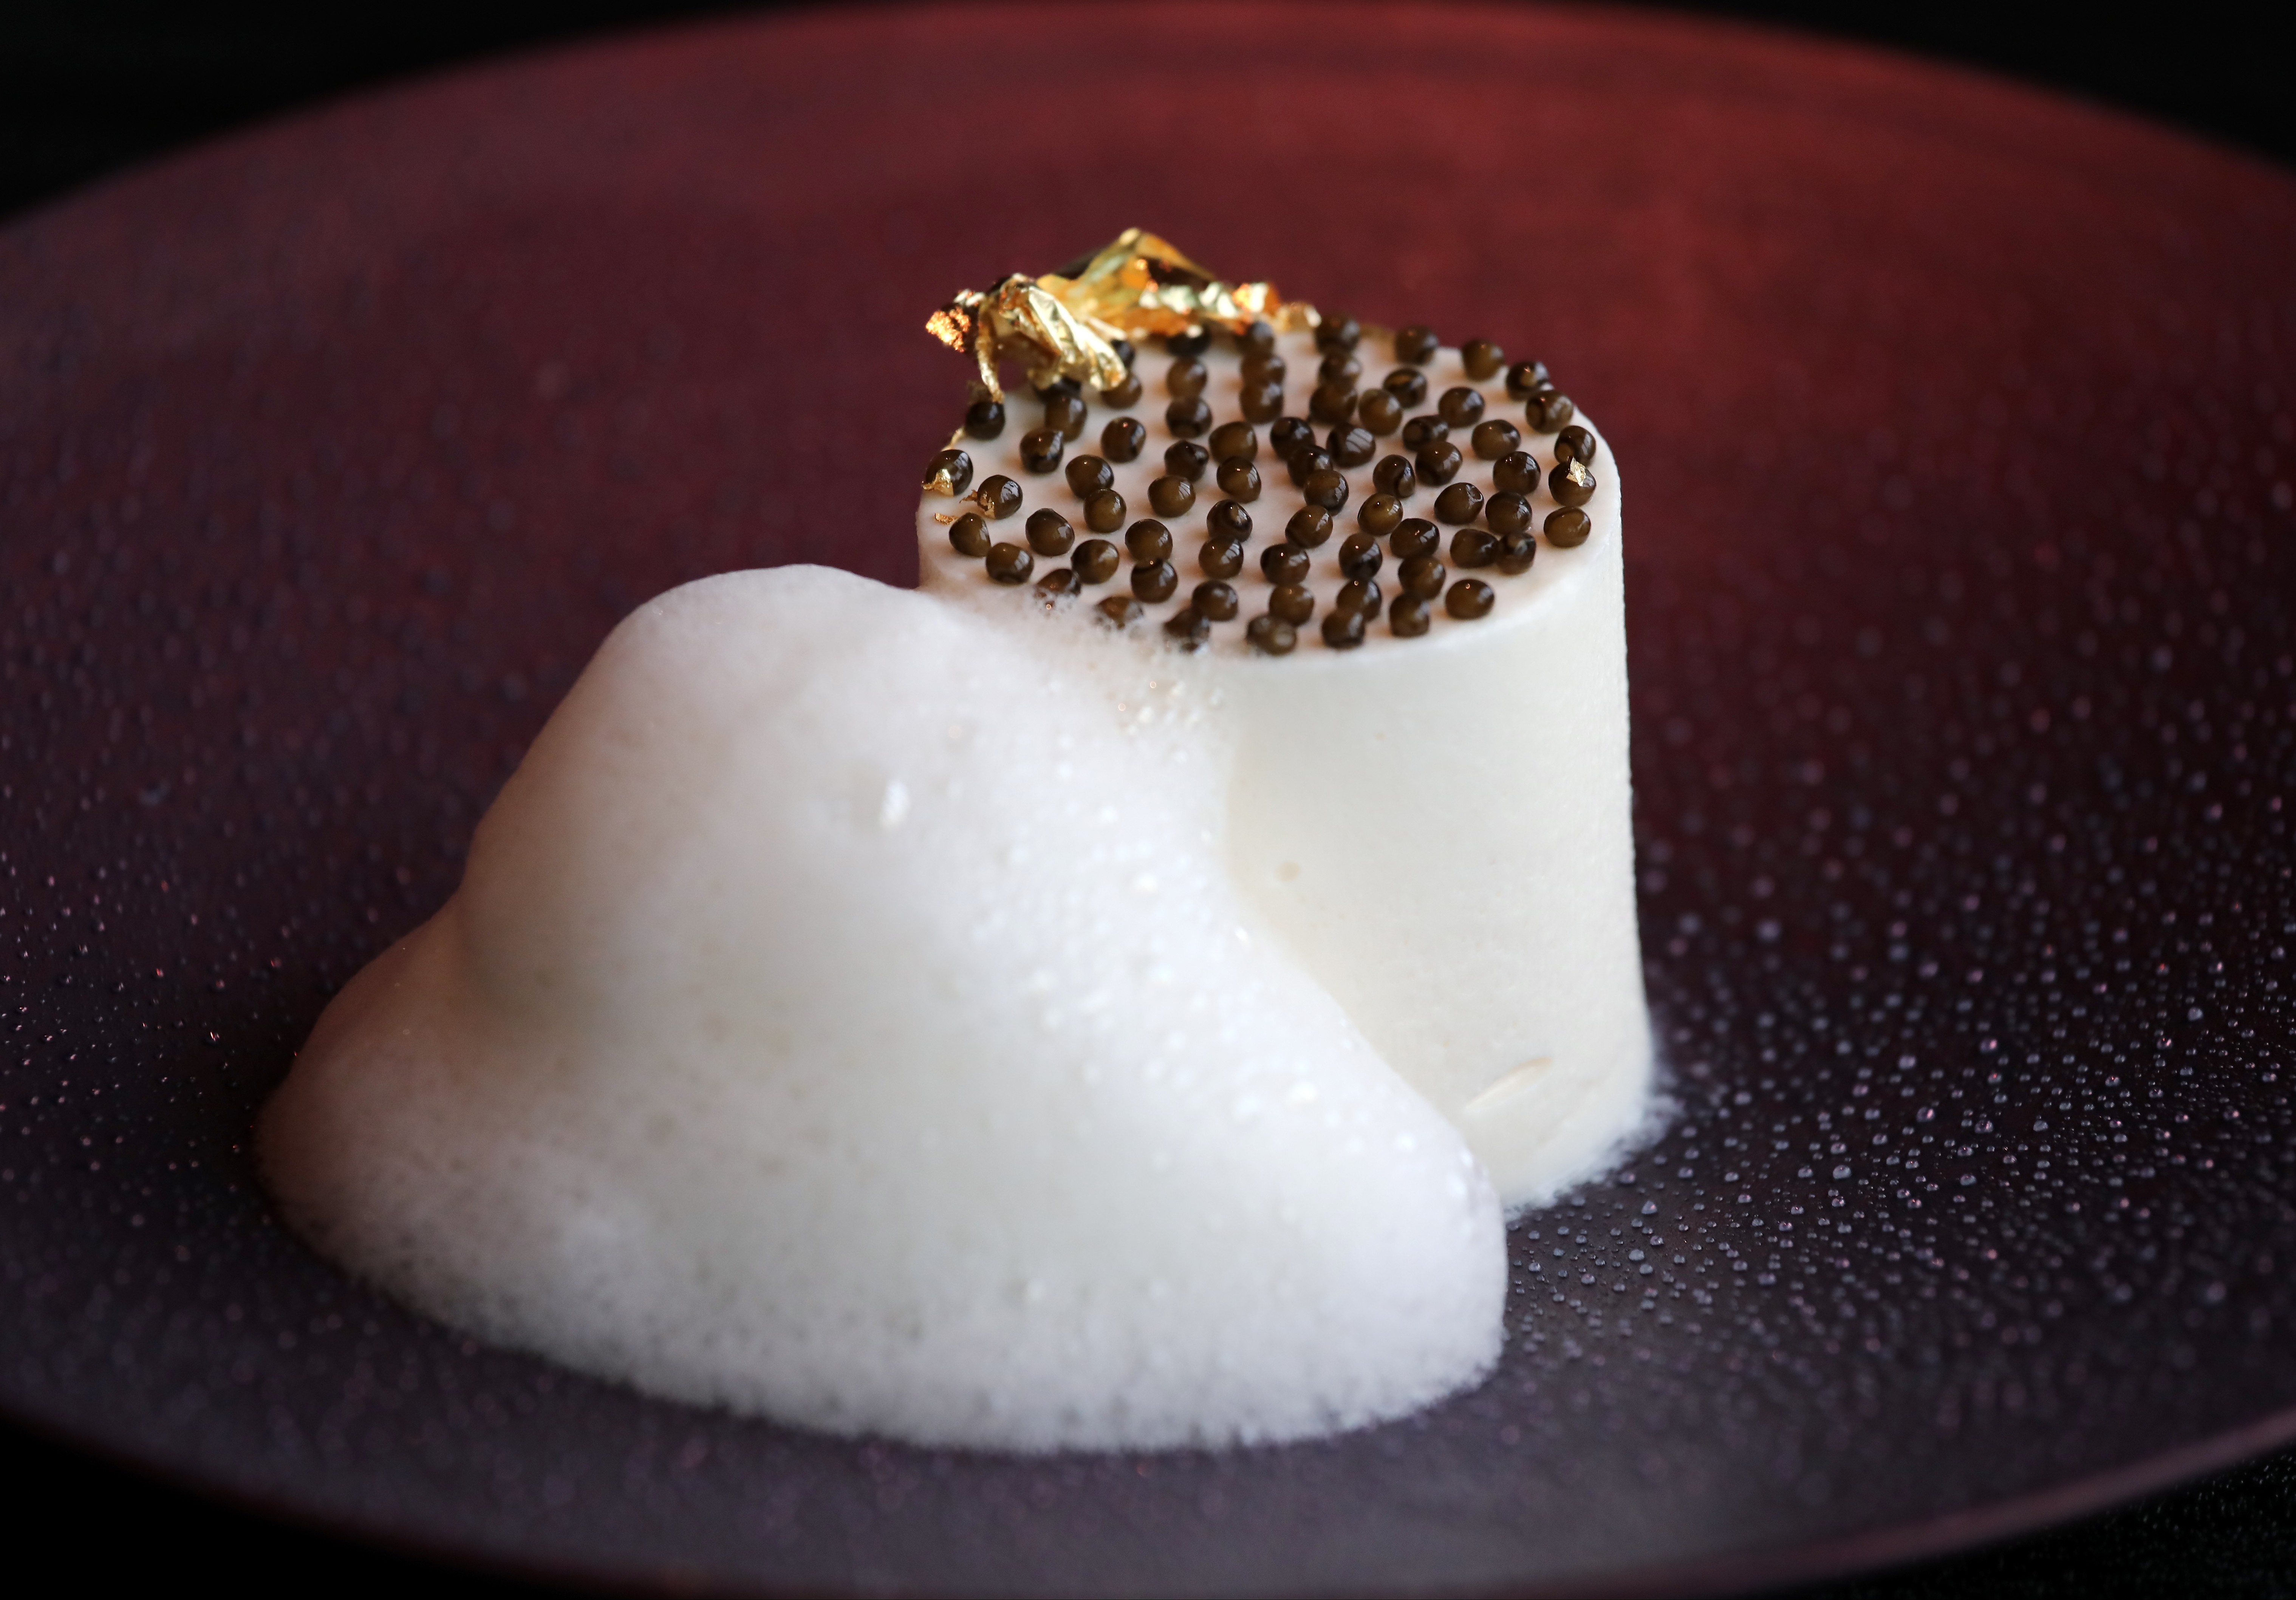 Cauliflower dessert with egg yolk, caviar, white chocolate, and lime foam, available at Écriture. Photo: Jonathan Wong